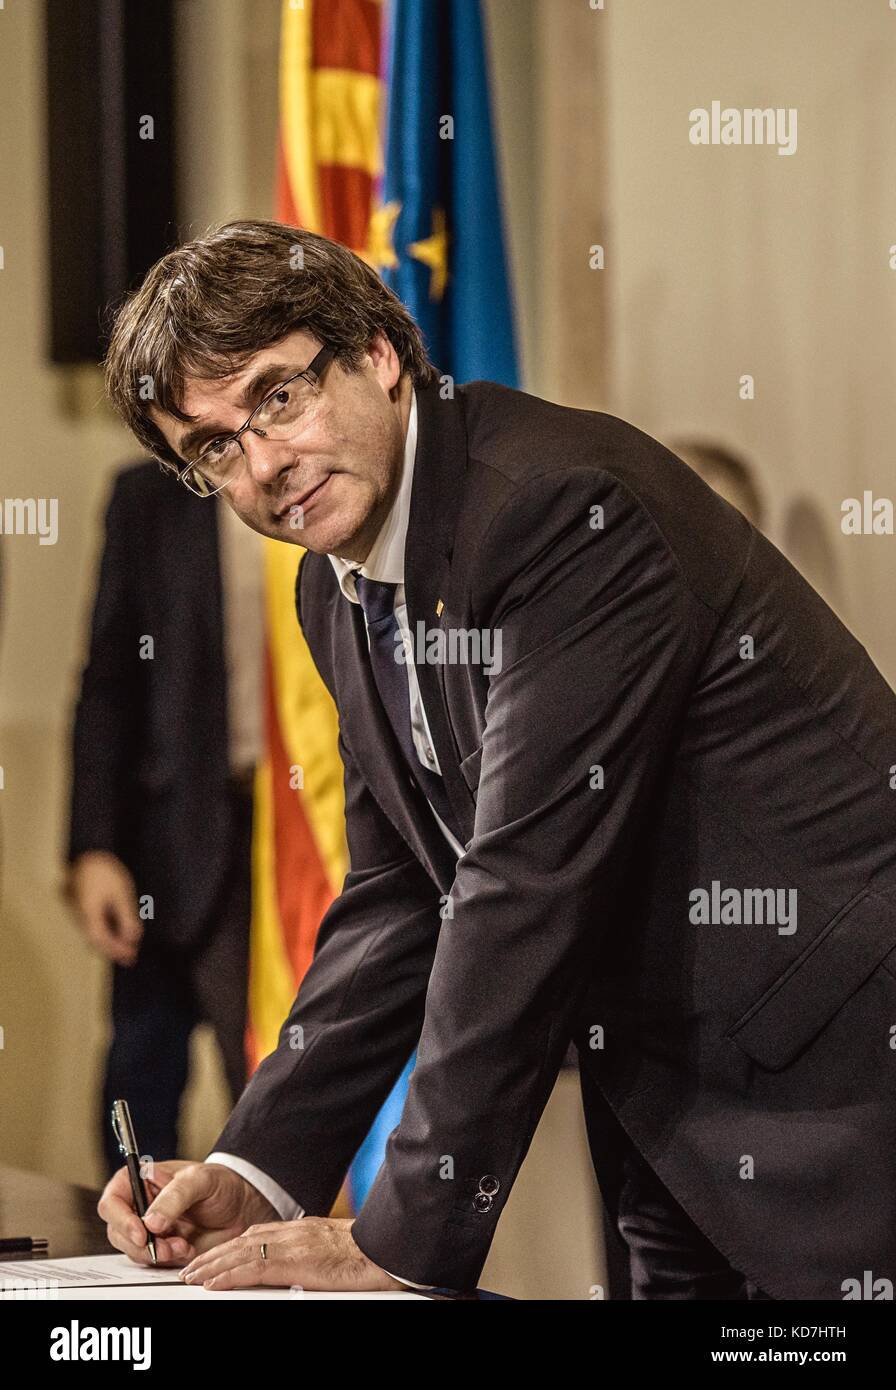 Barcelona, Spain. 10th Oct, 2017. CARLES PUIGDEMONT, President of the Generalitat of Catalonia, signs the declaration of independence at the end of an plenary session in which he postponed the independence and the proclamation of the Catalan Republic after the valoraion of the results of the October 1st secession referendum. Credit: Matthias Oesterle/Alamy Live News Stock Photo